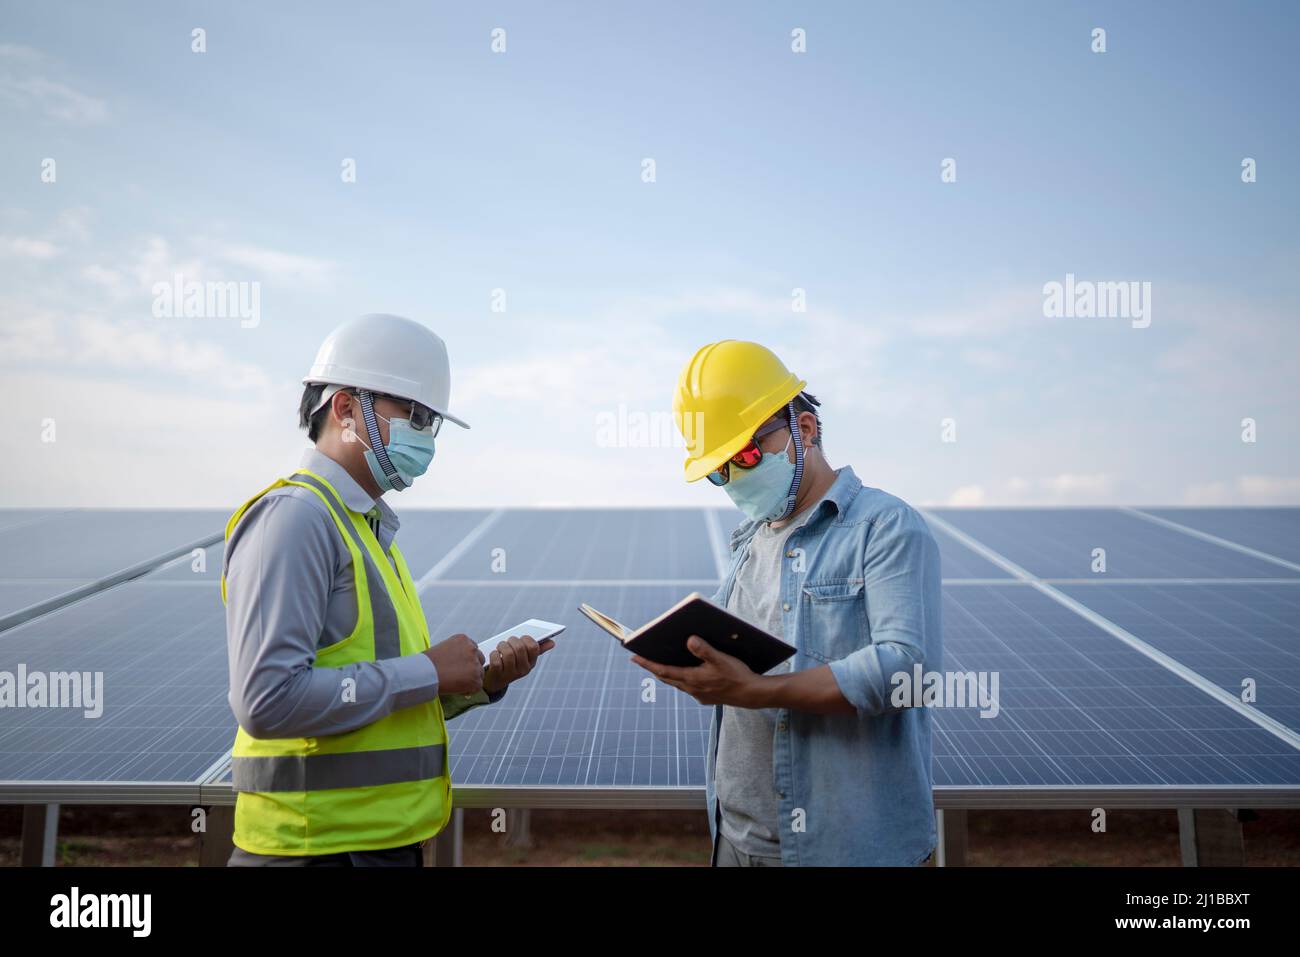 Engineering and technicians to power solar panel renewable power plants in Thailand Stock Photo